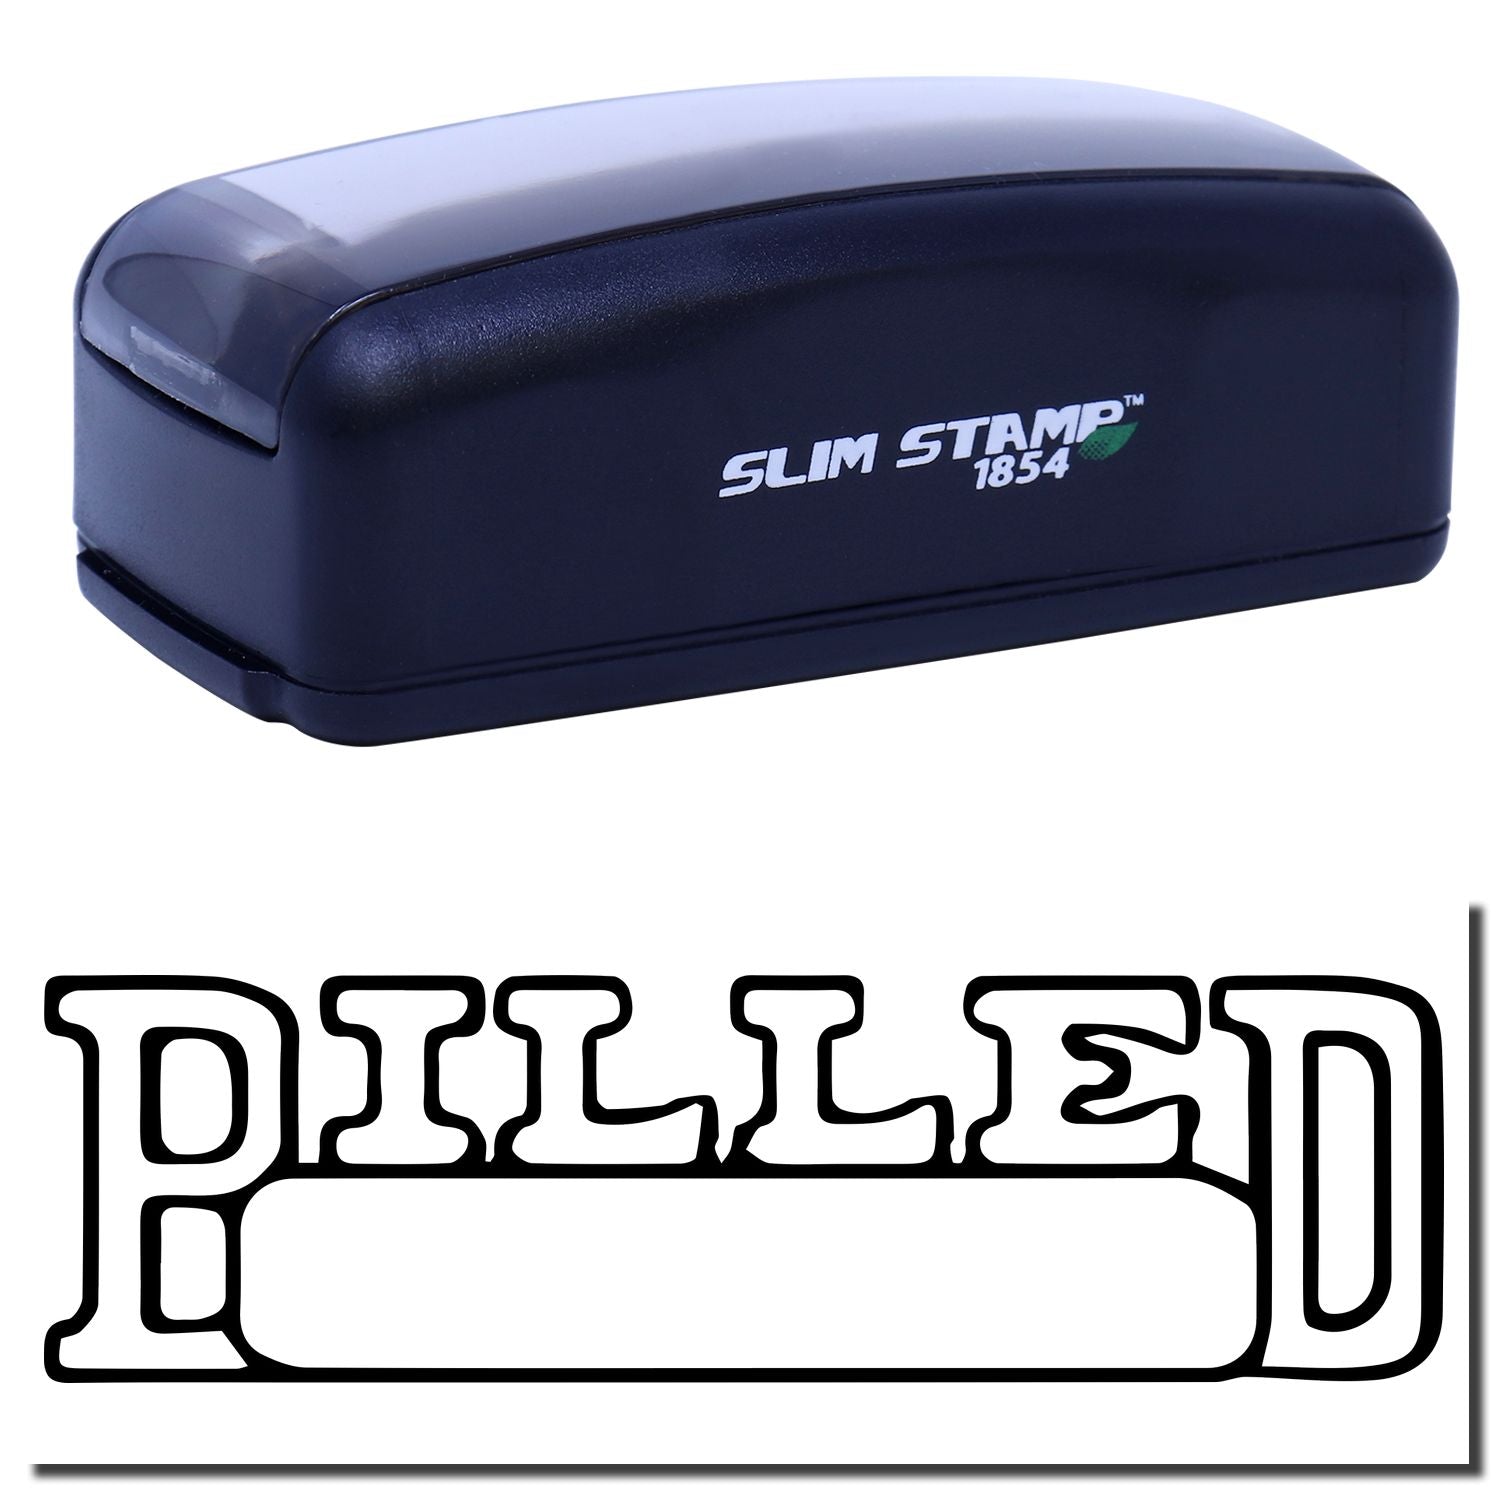 A stock office pre-inked stamp with a stamped image showing how the text "BILLED" in a large outline font with a date box is displayed after stamping.